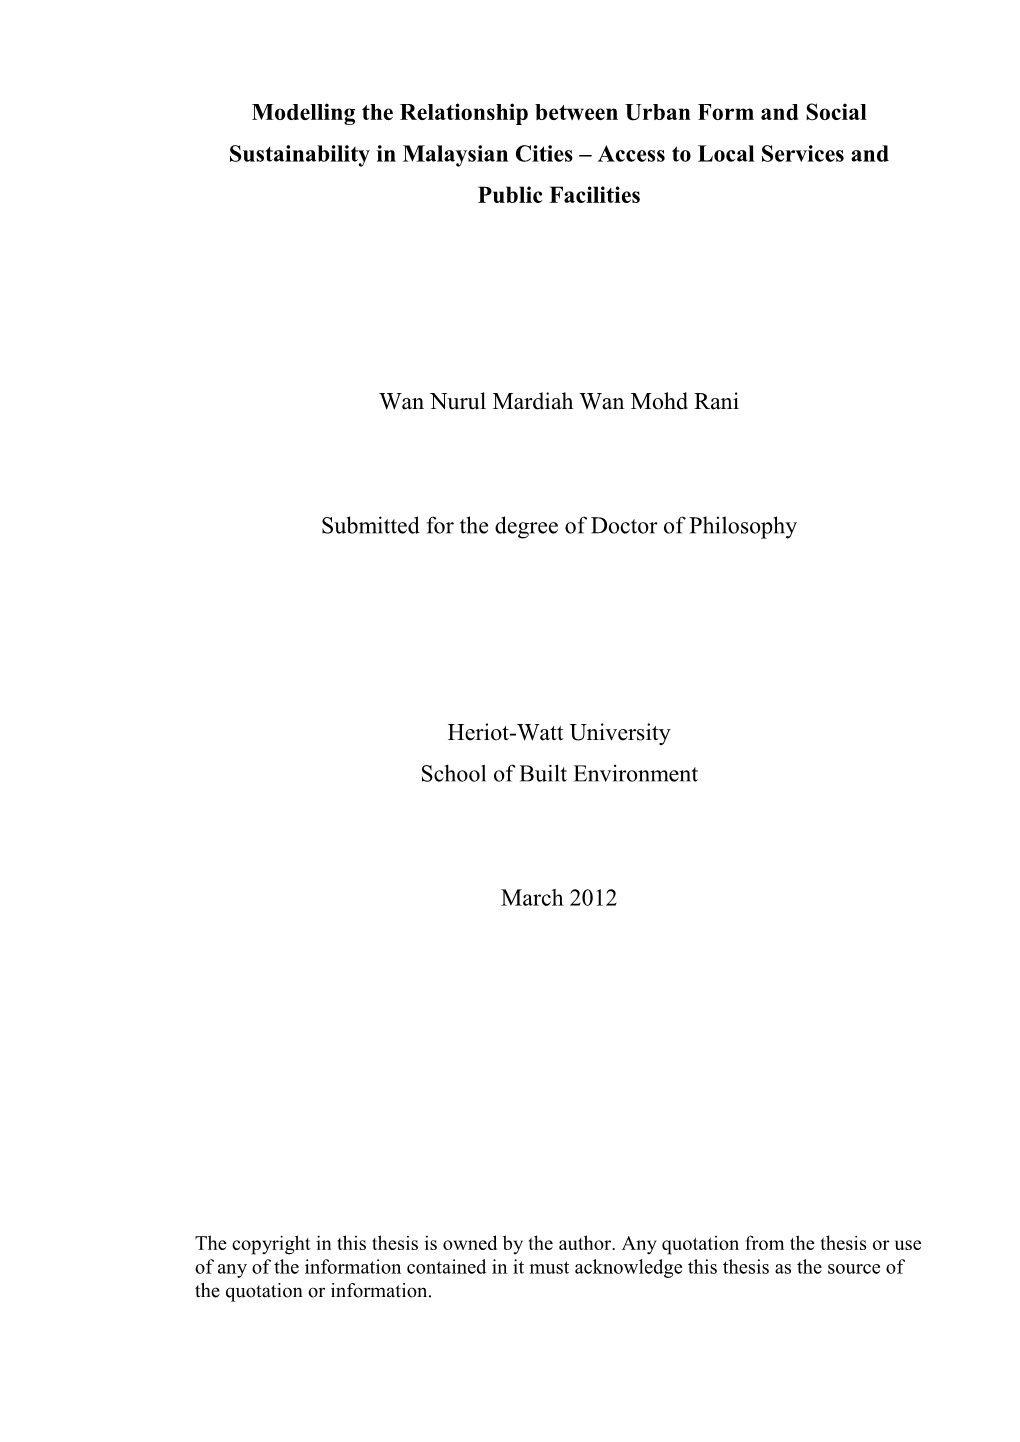 Thesis Style Document